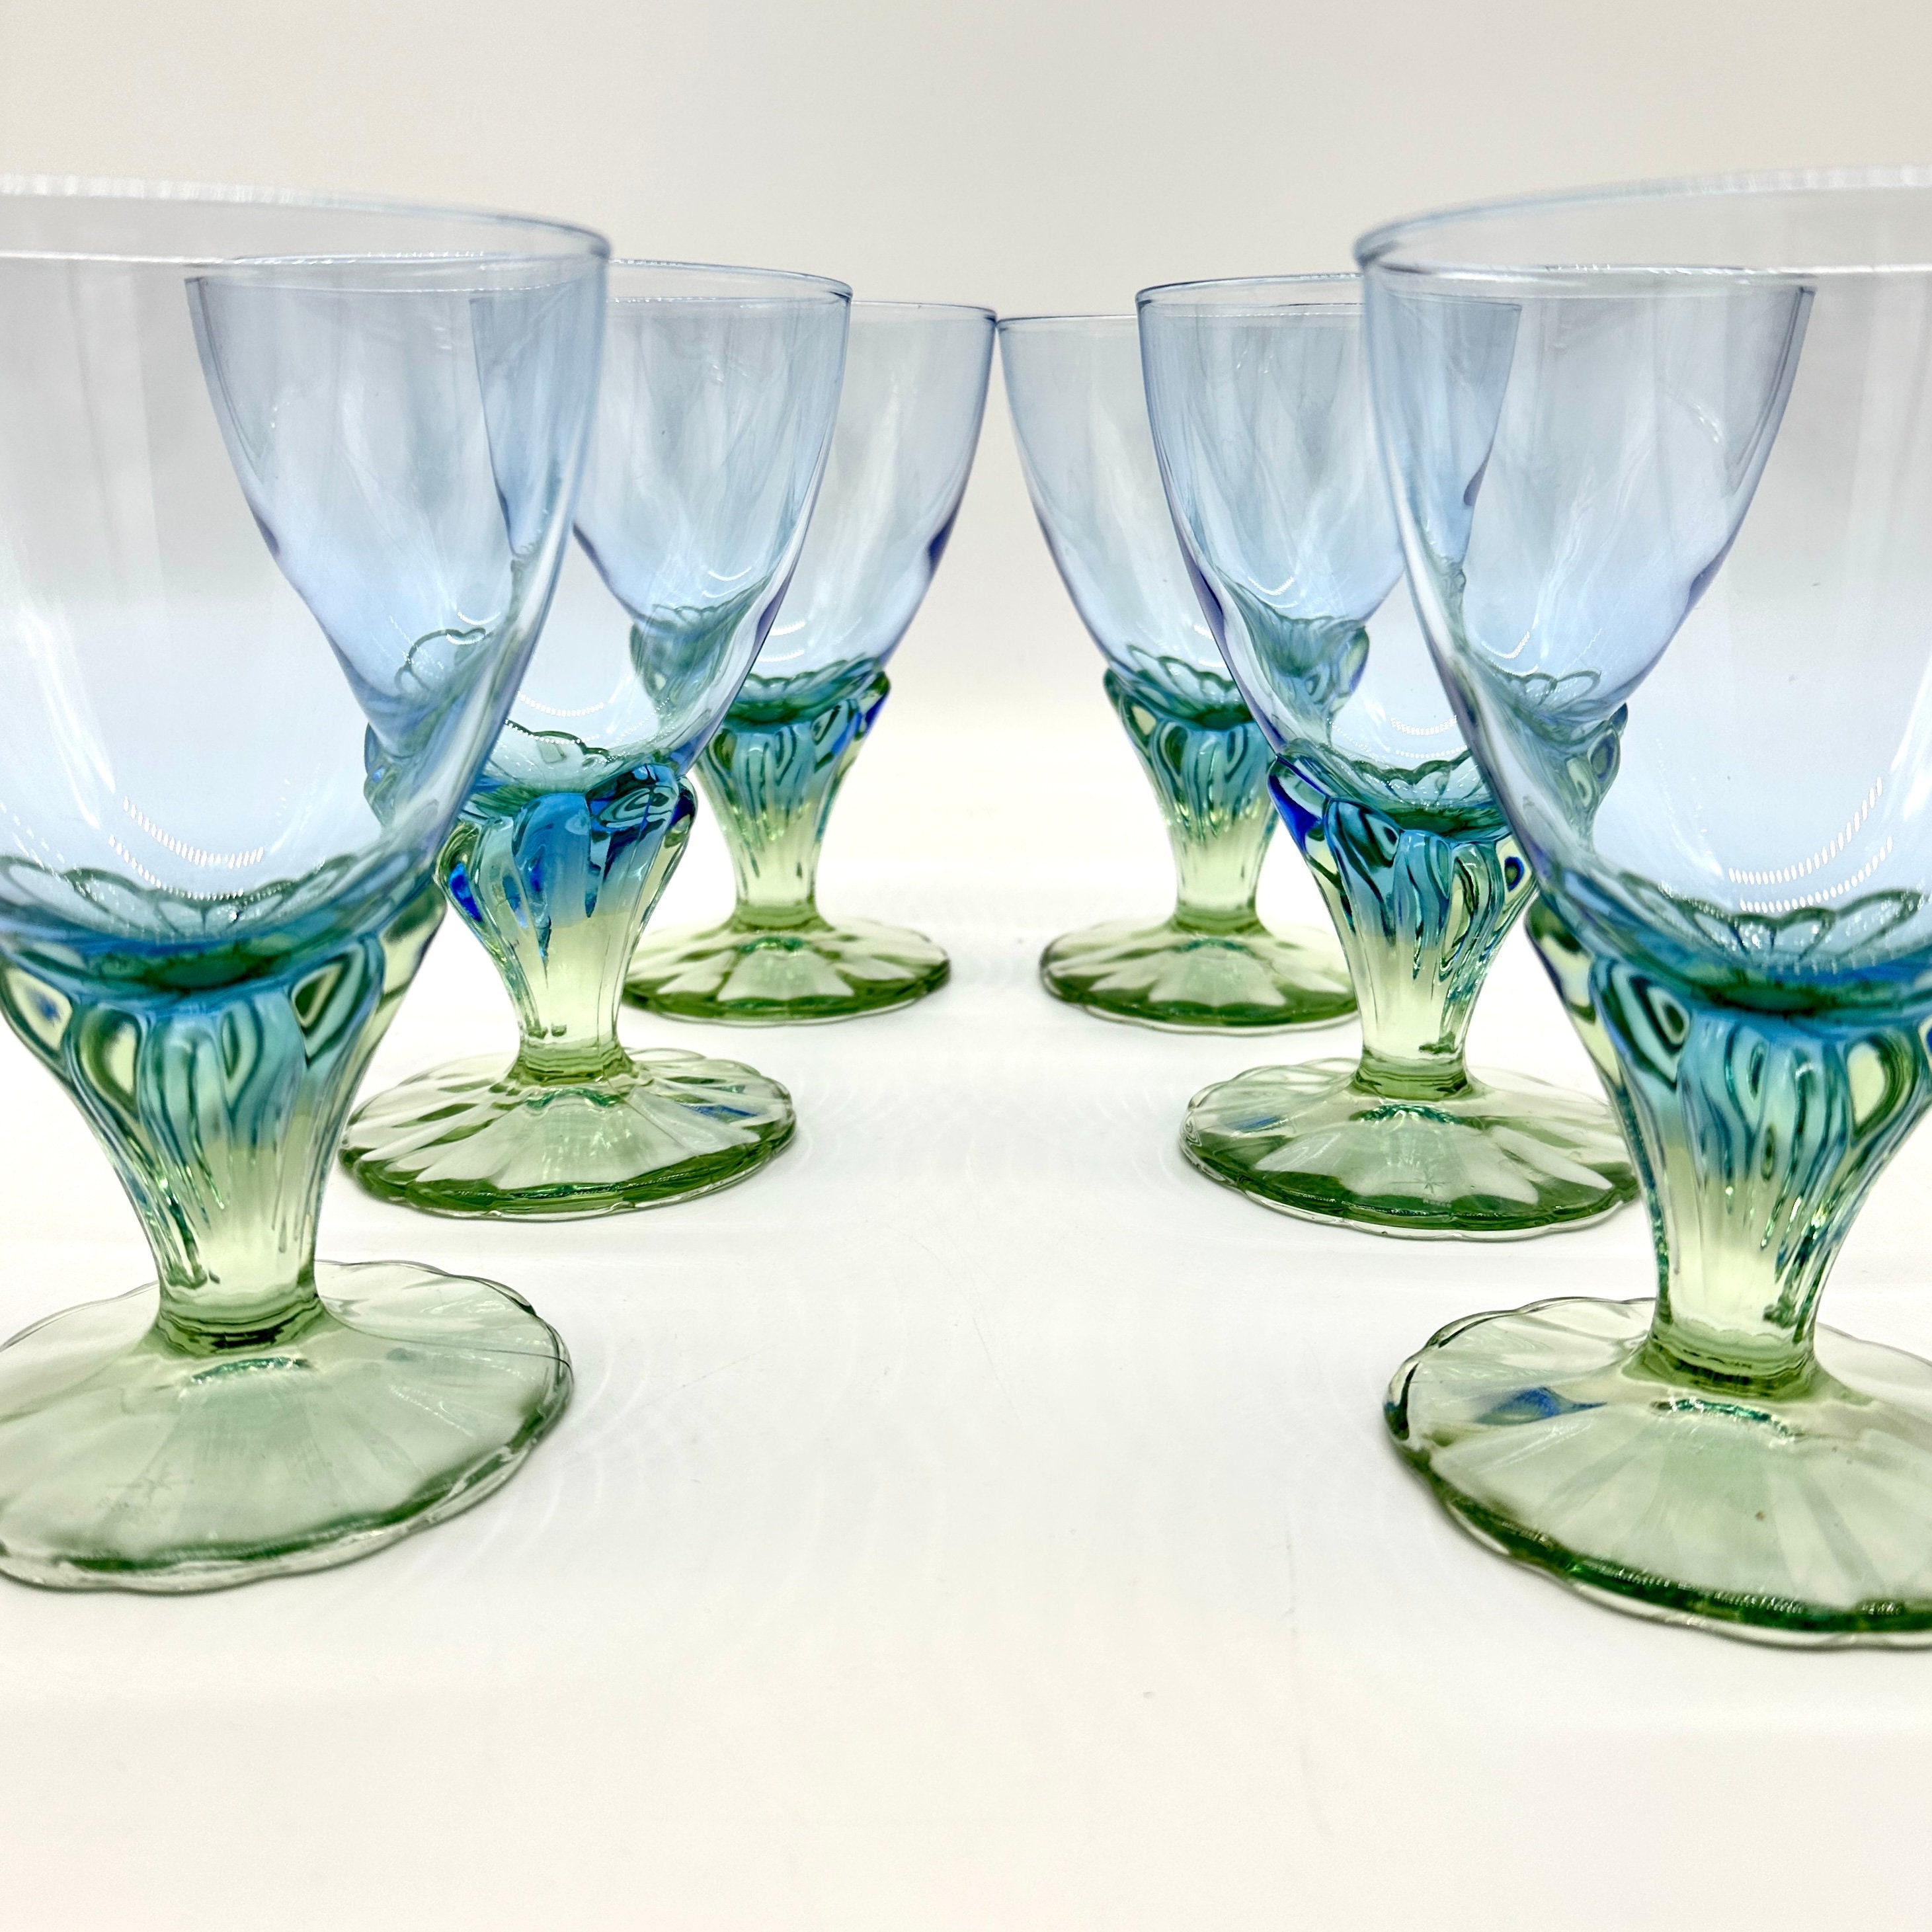 Bormioli Rocco Bahia Champagne Glasses | Stunning Blue and Green Footed  Goblets | Italian Glassware Set of *6* | Mermaid Glasses | Italy